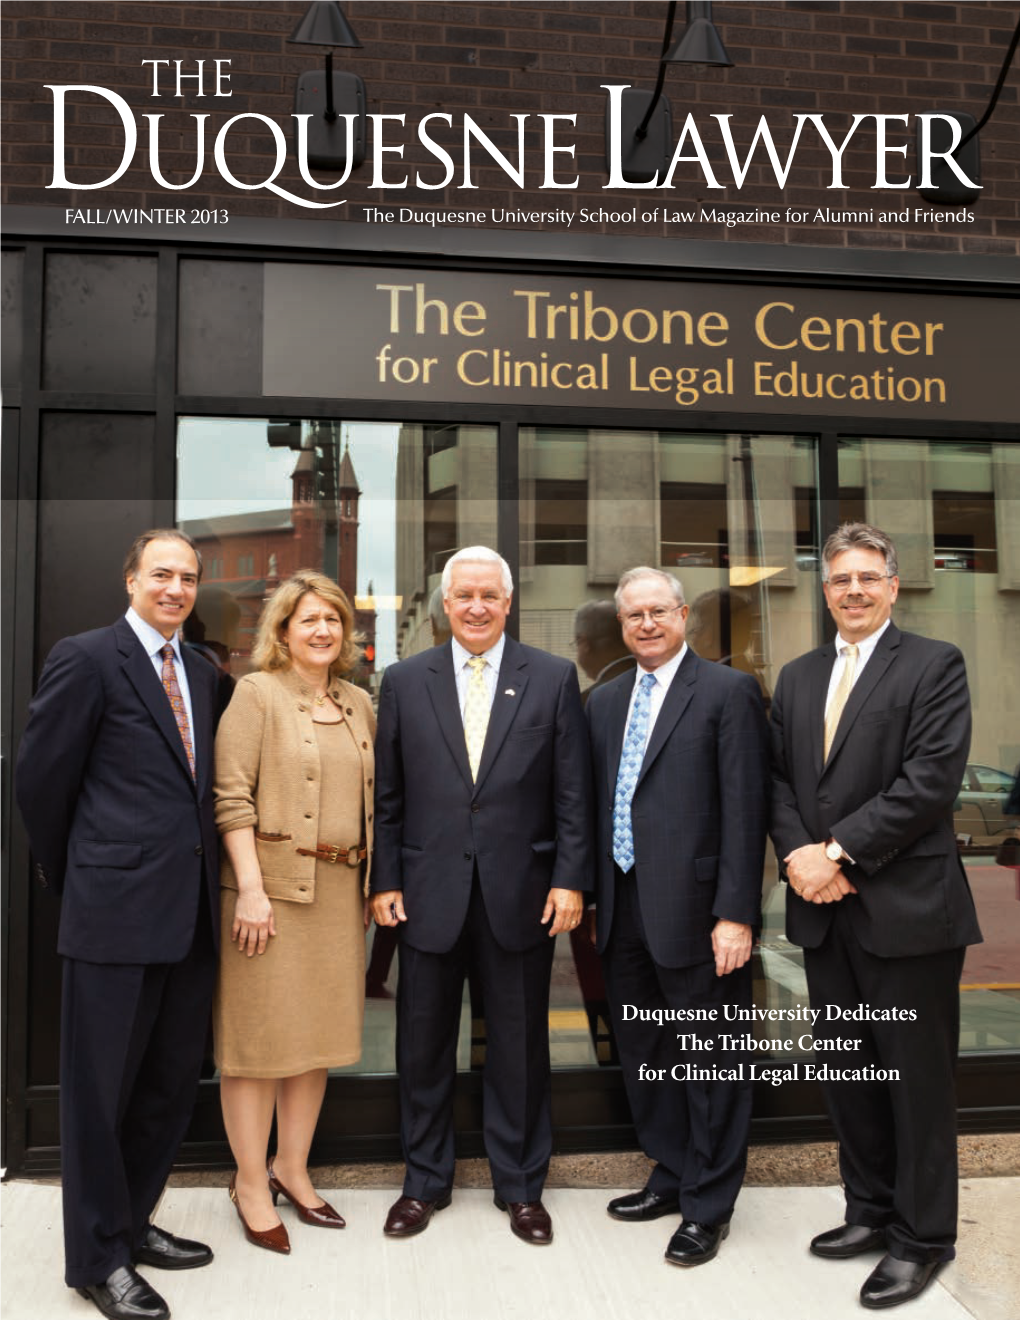 Duquesne University Dedicates the Tribone Center for Clinical